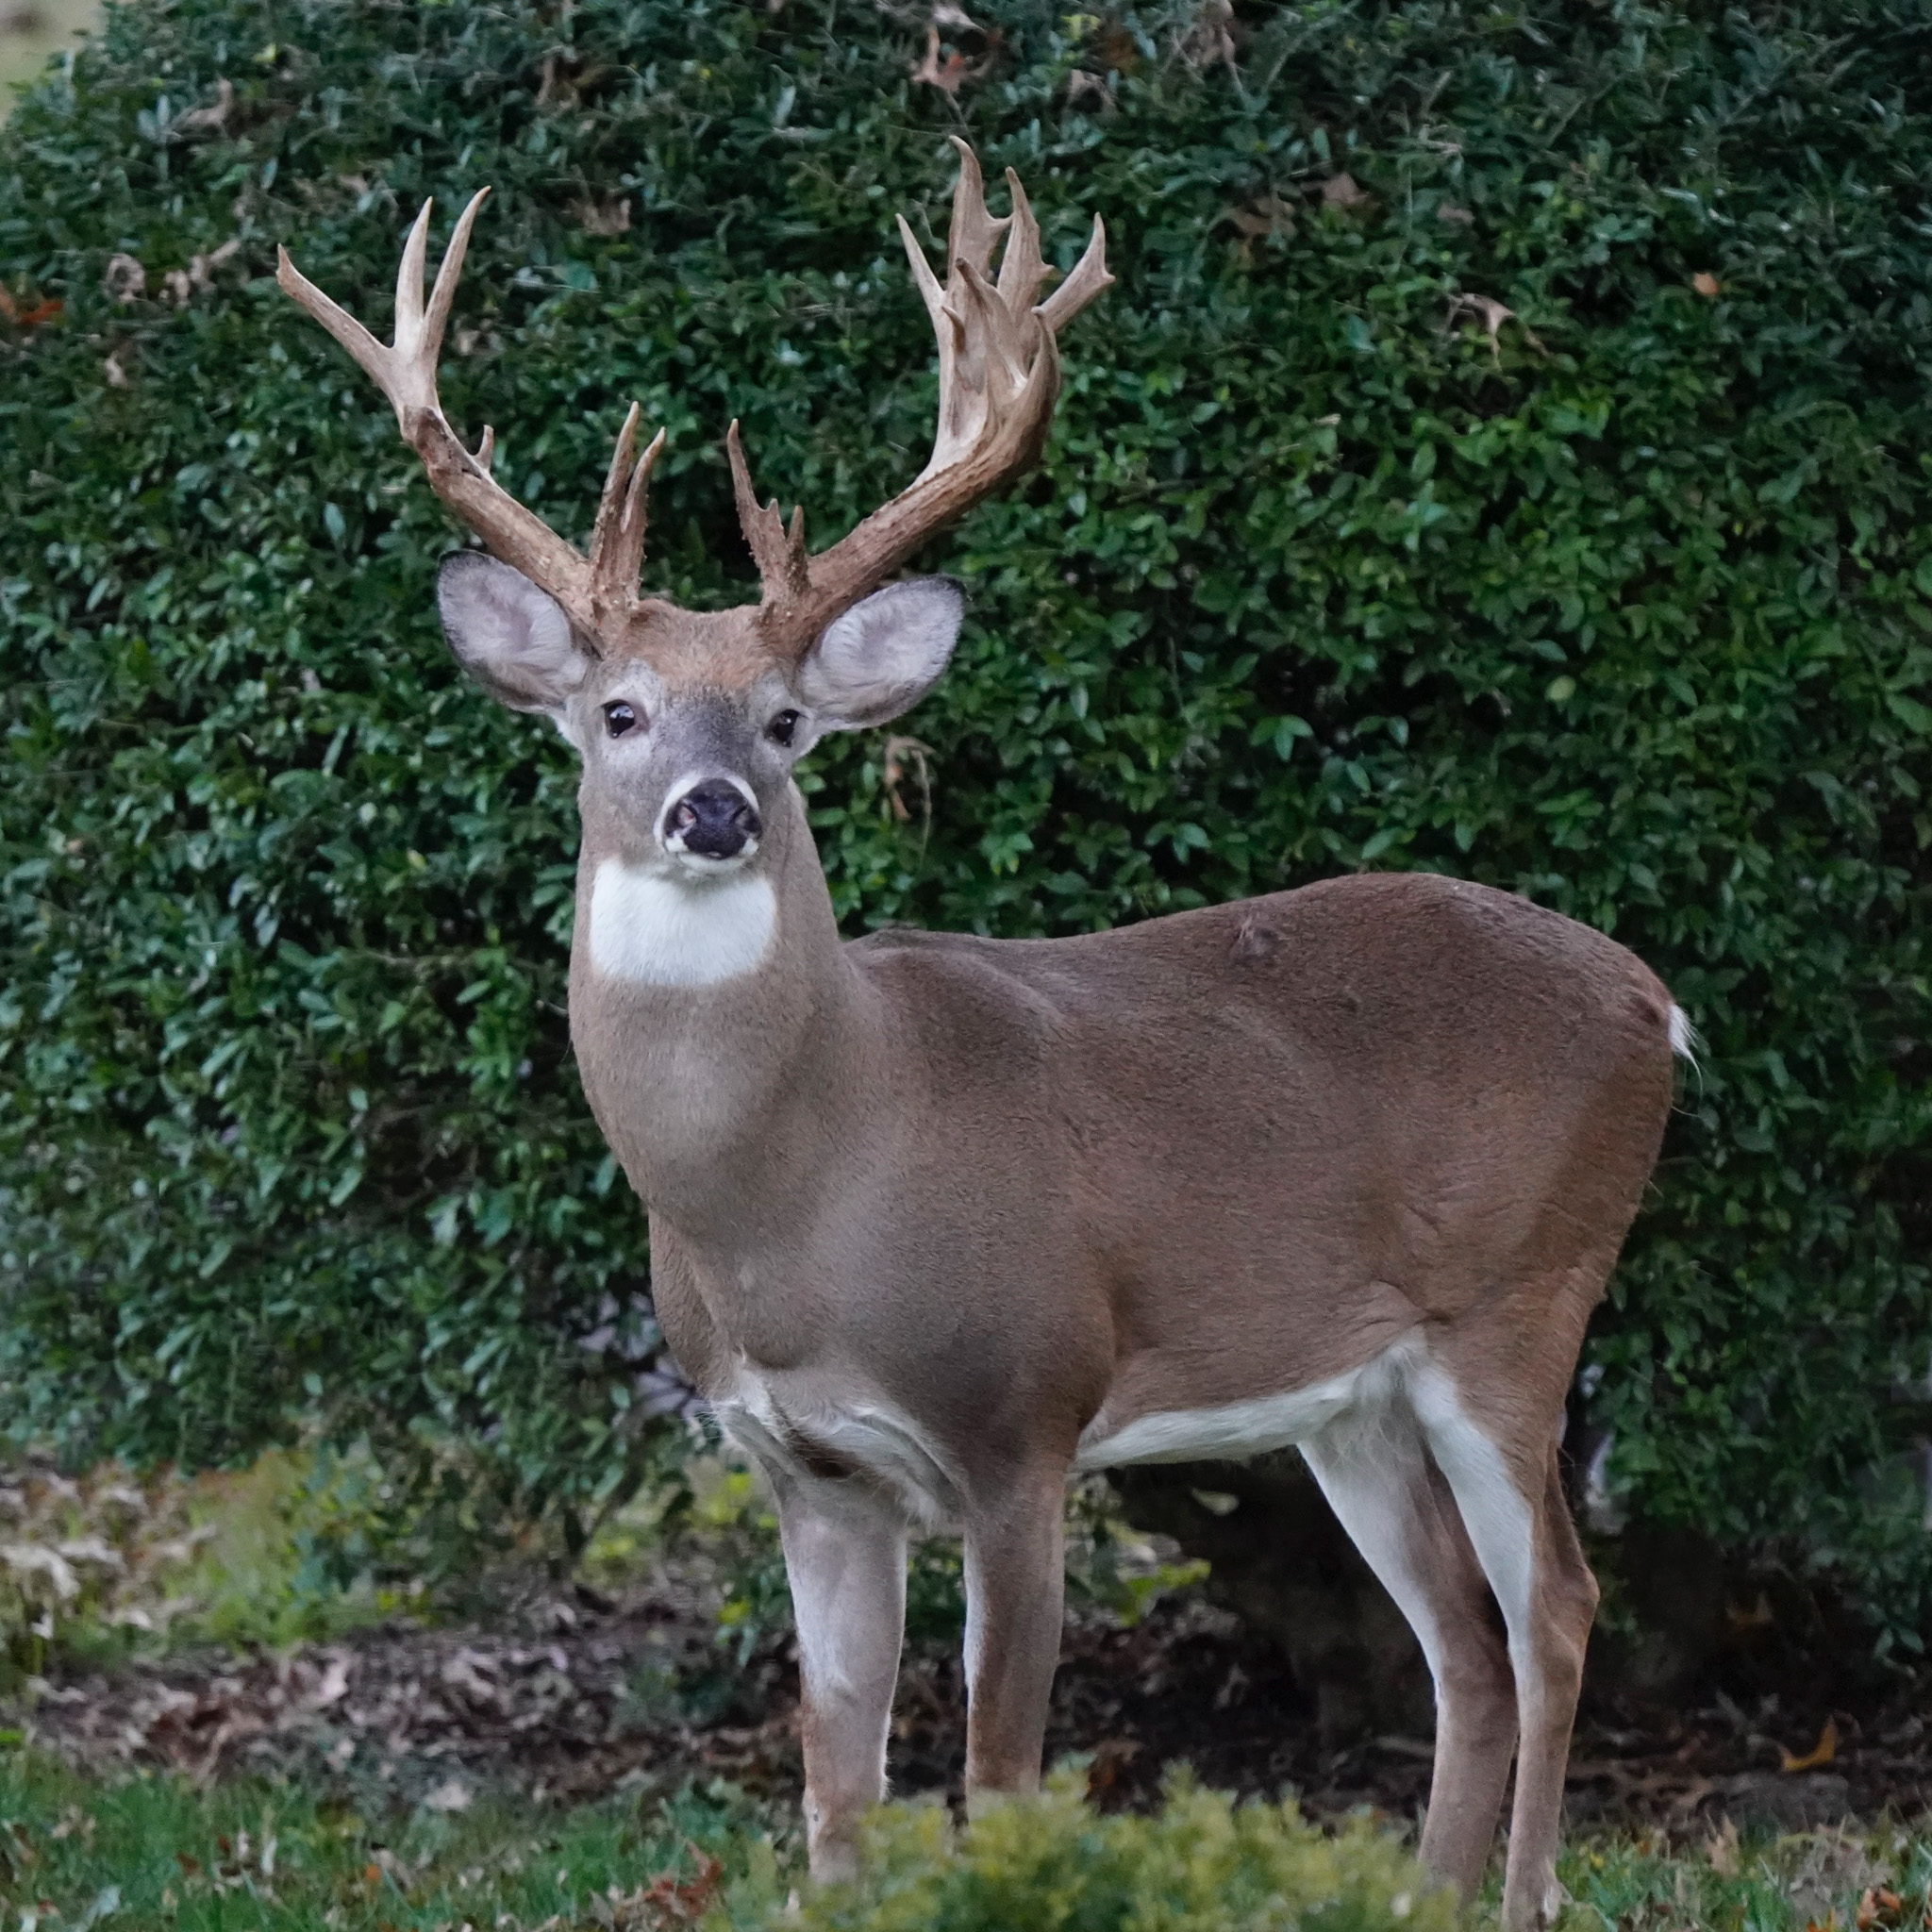 The Hollywood Cemetery deer in 2021 with a broken mainbeam.